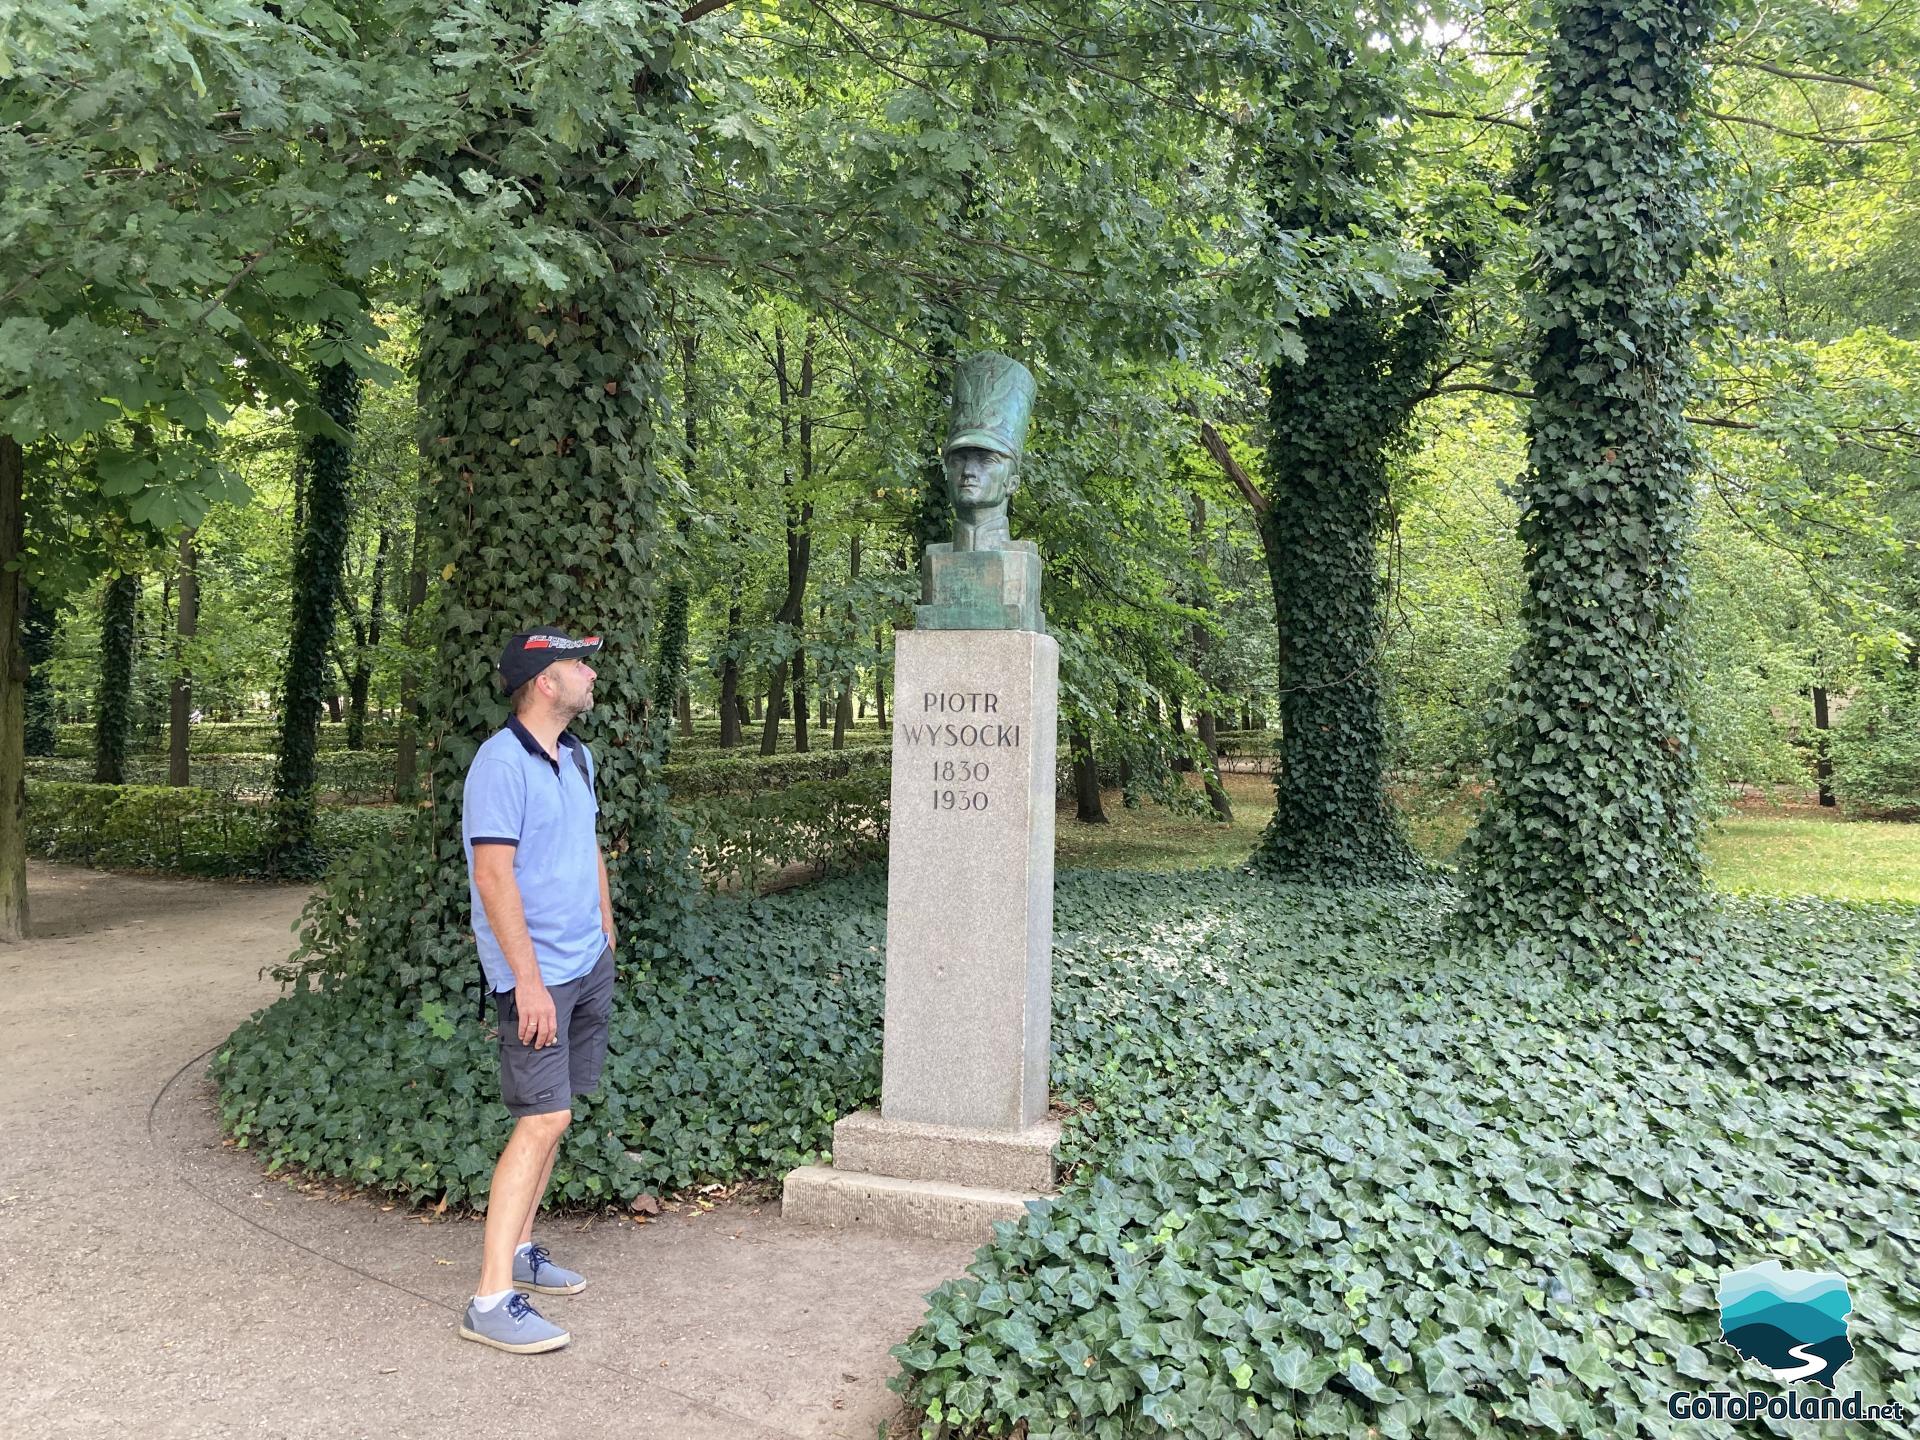 a man is standing in front of the bust of a soldier on a pedestal in a park